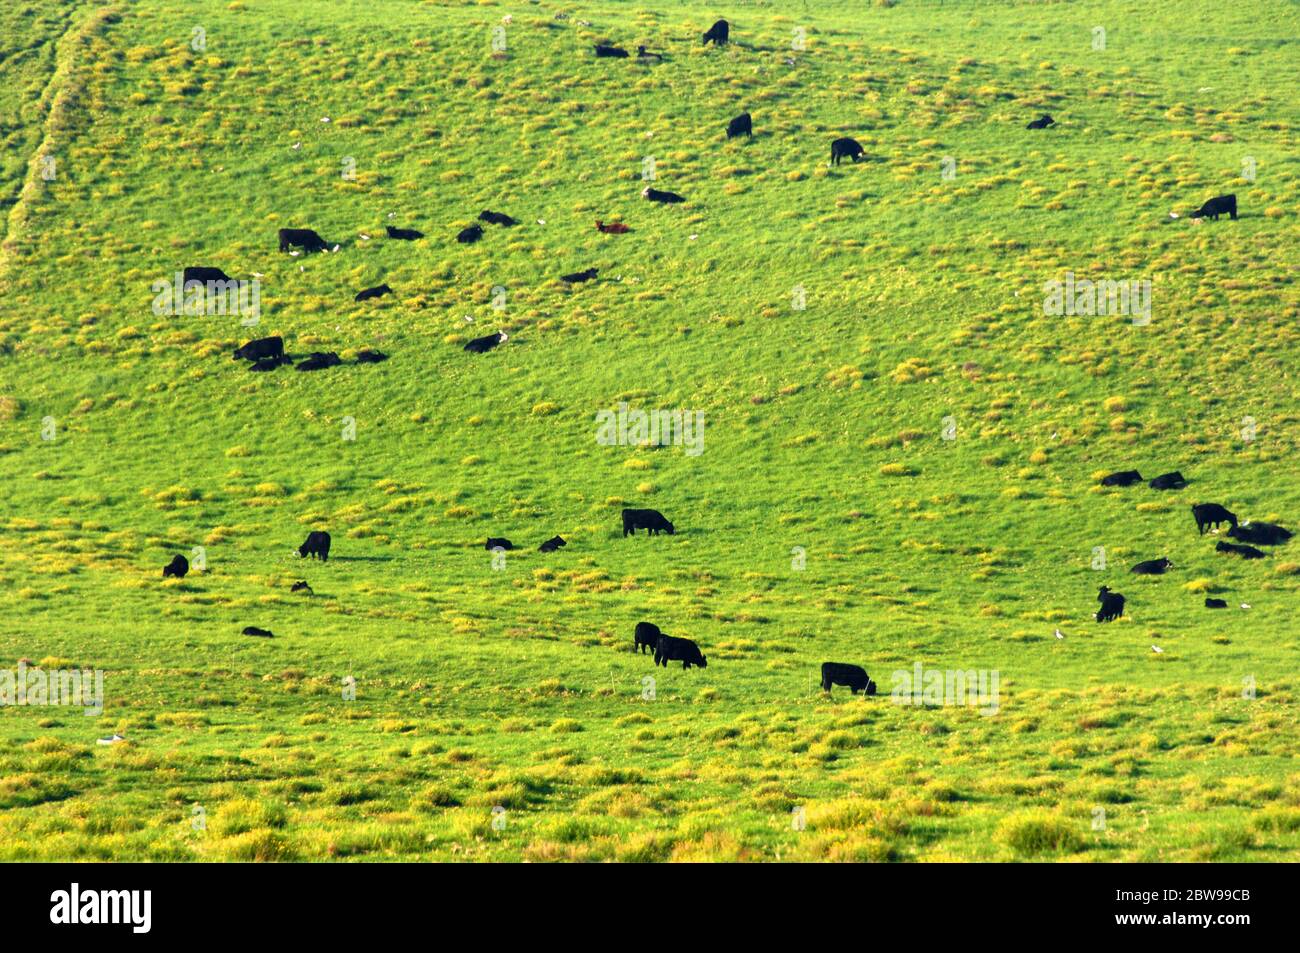 Kohala Mountain serves as feeding ground for cattle on ranches owned for generations on the Big Island of Hawaii. Stock Photo